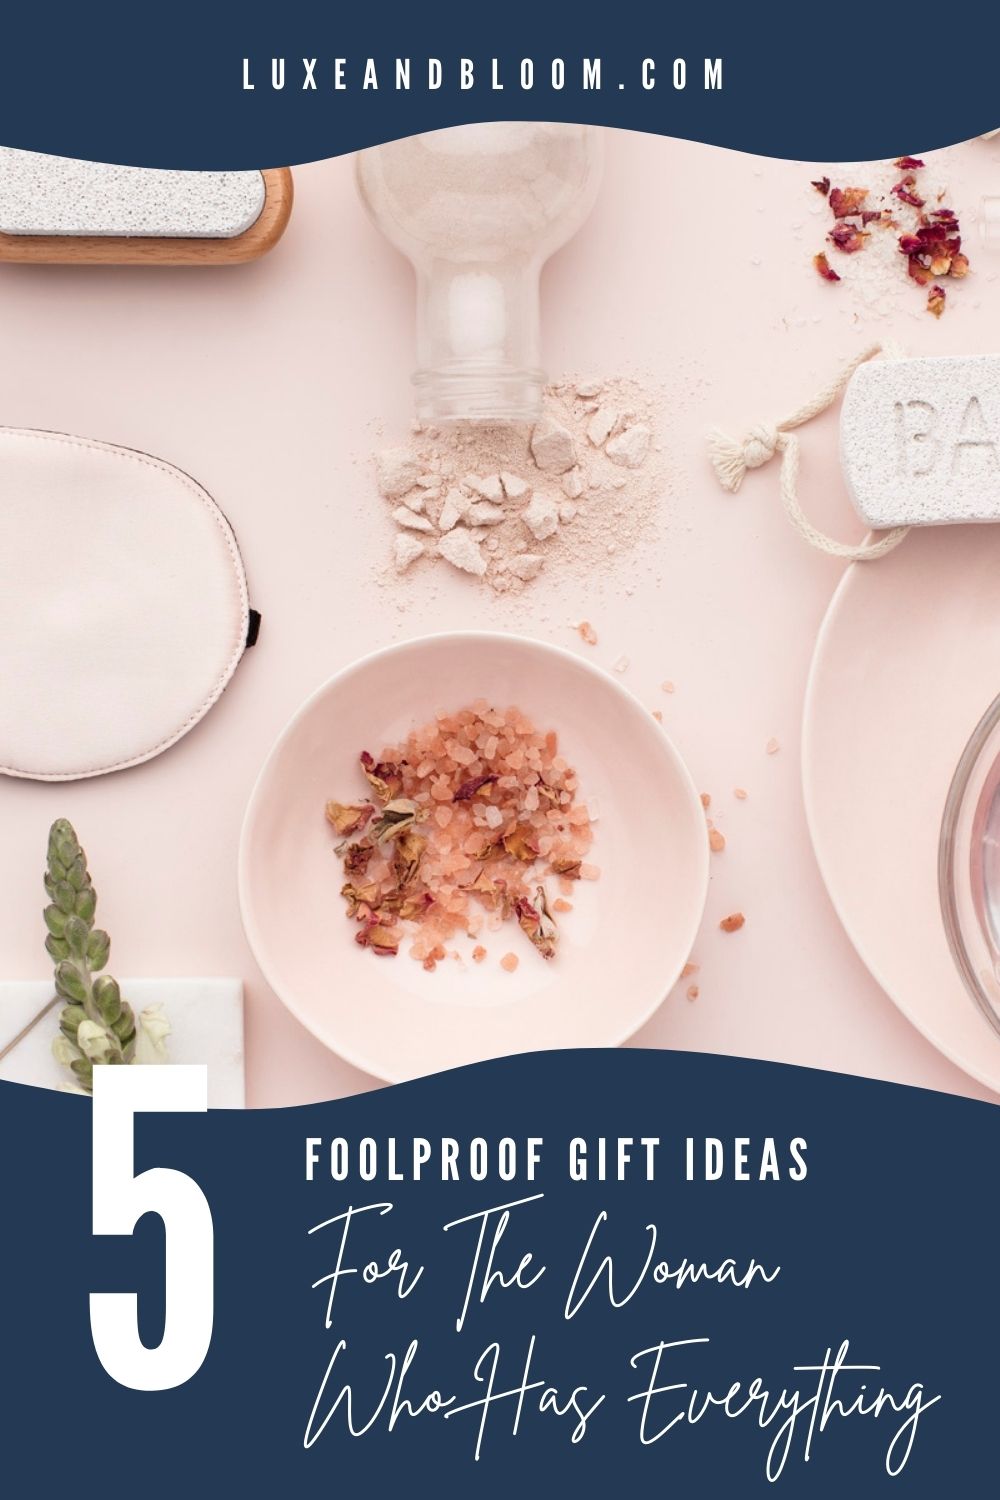 5 Foolproof Gift Ideas For The Woman Who Has Everything